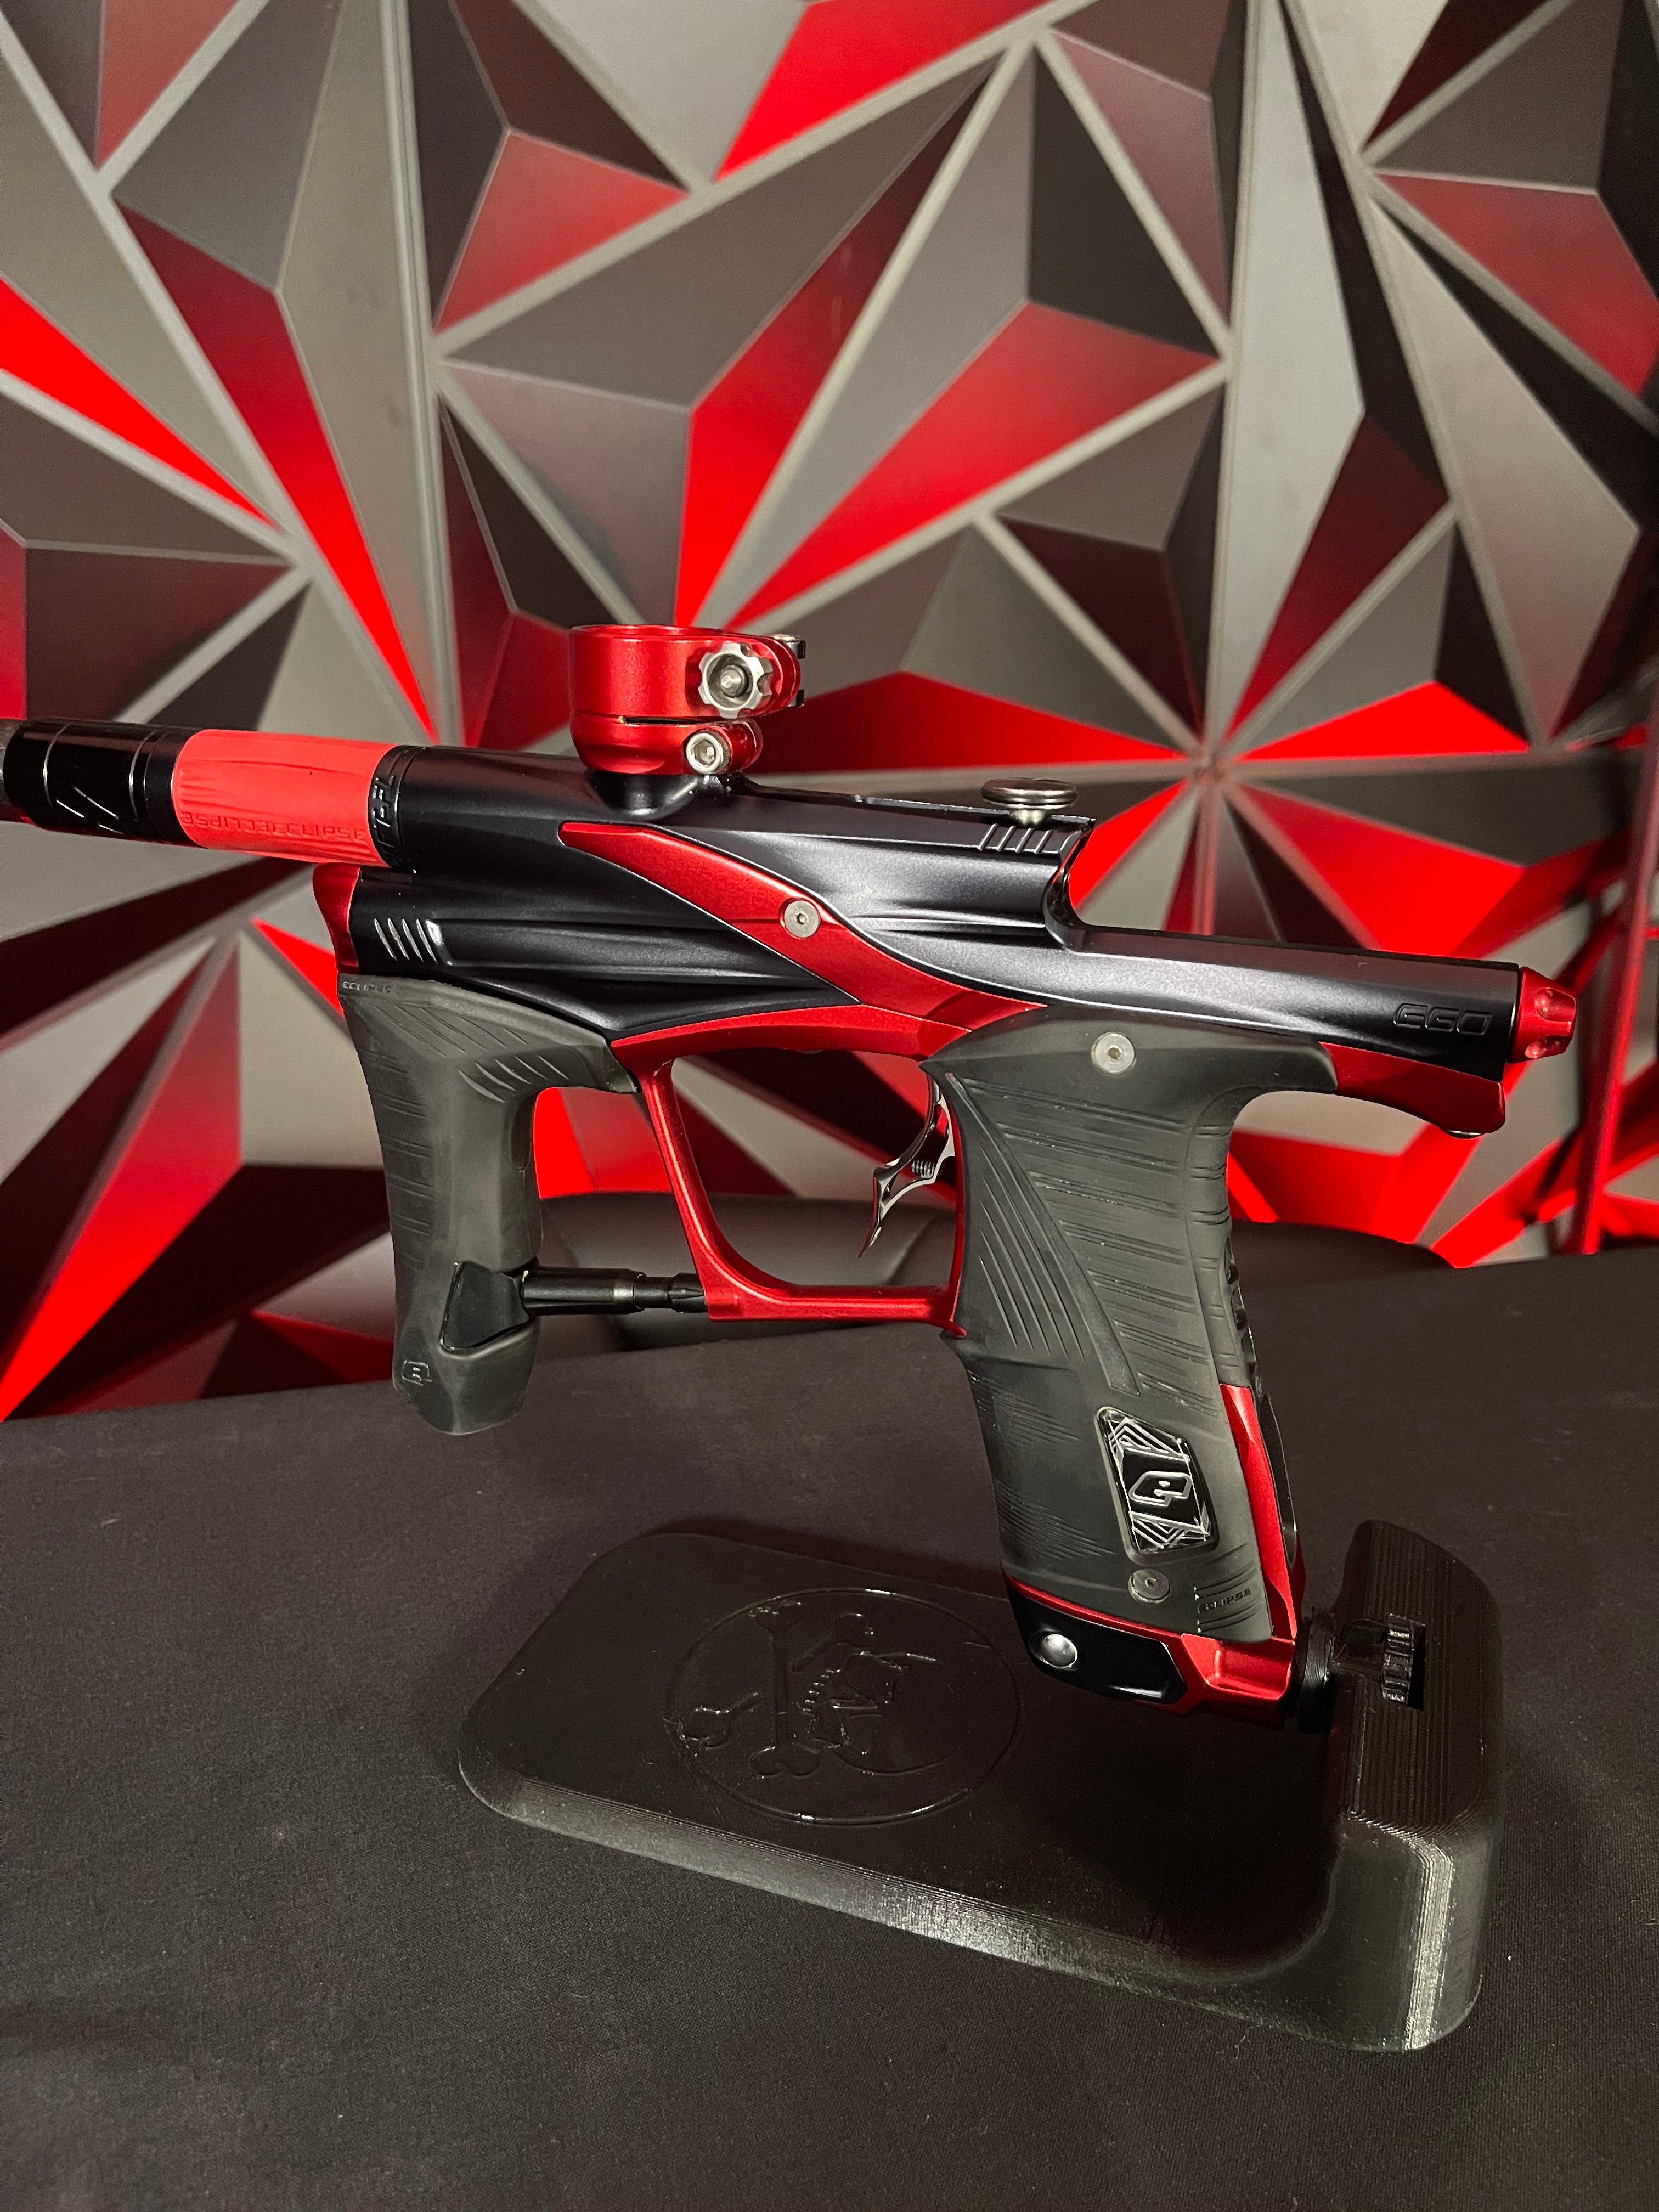 Used Planet Eclipse LV1.6 Paintball Gun - Black w/ Red Infamous